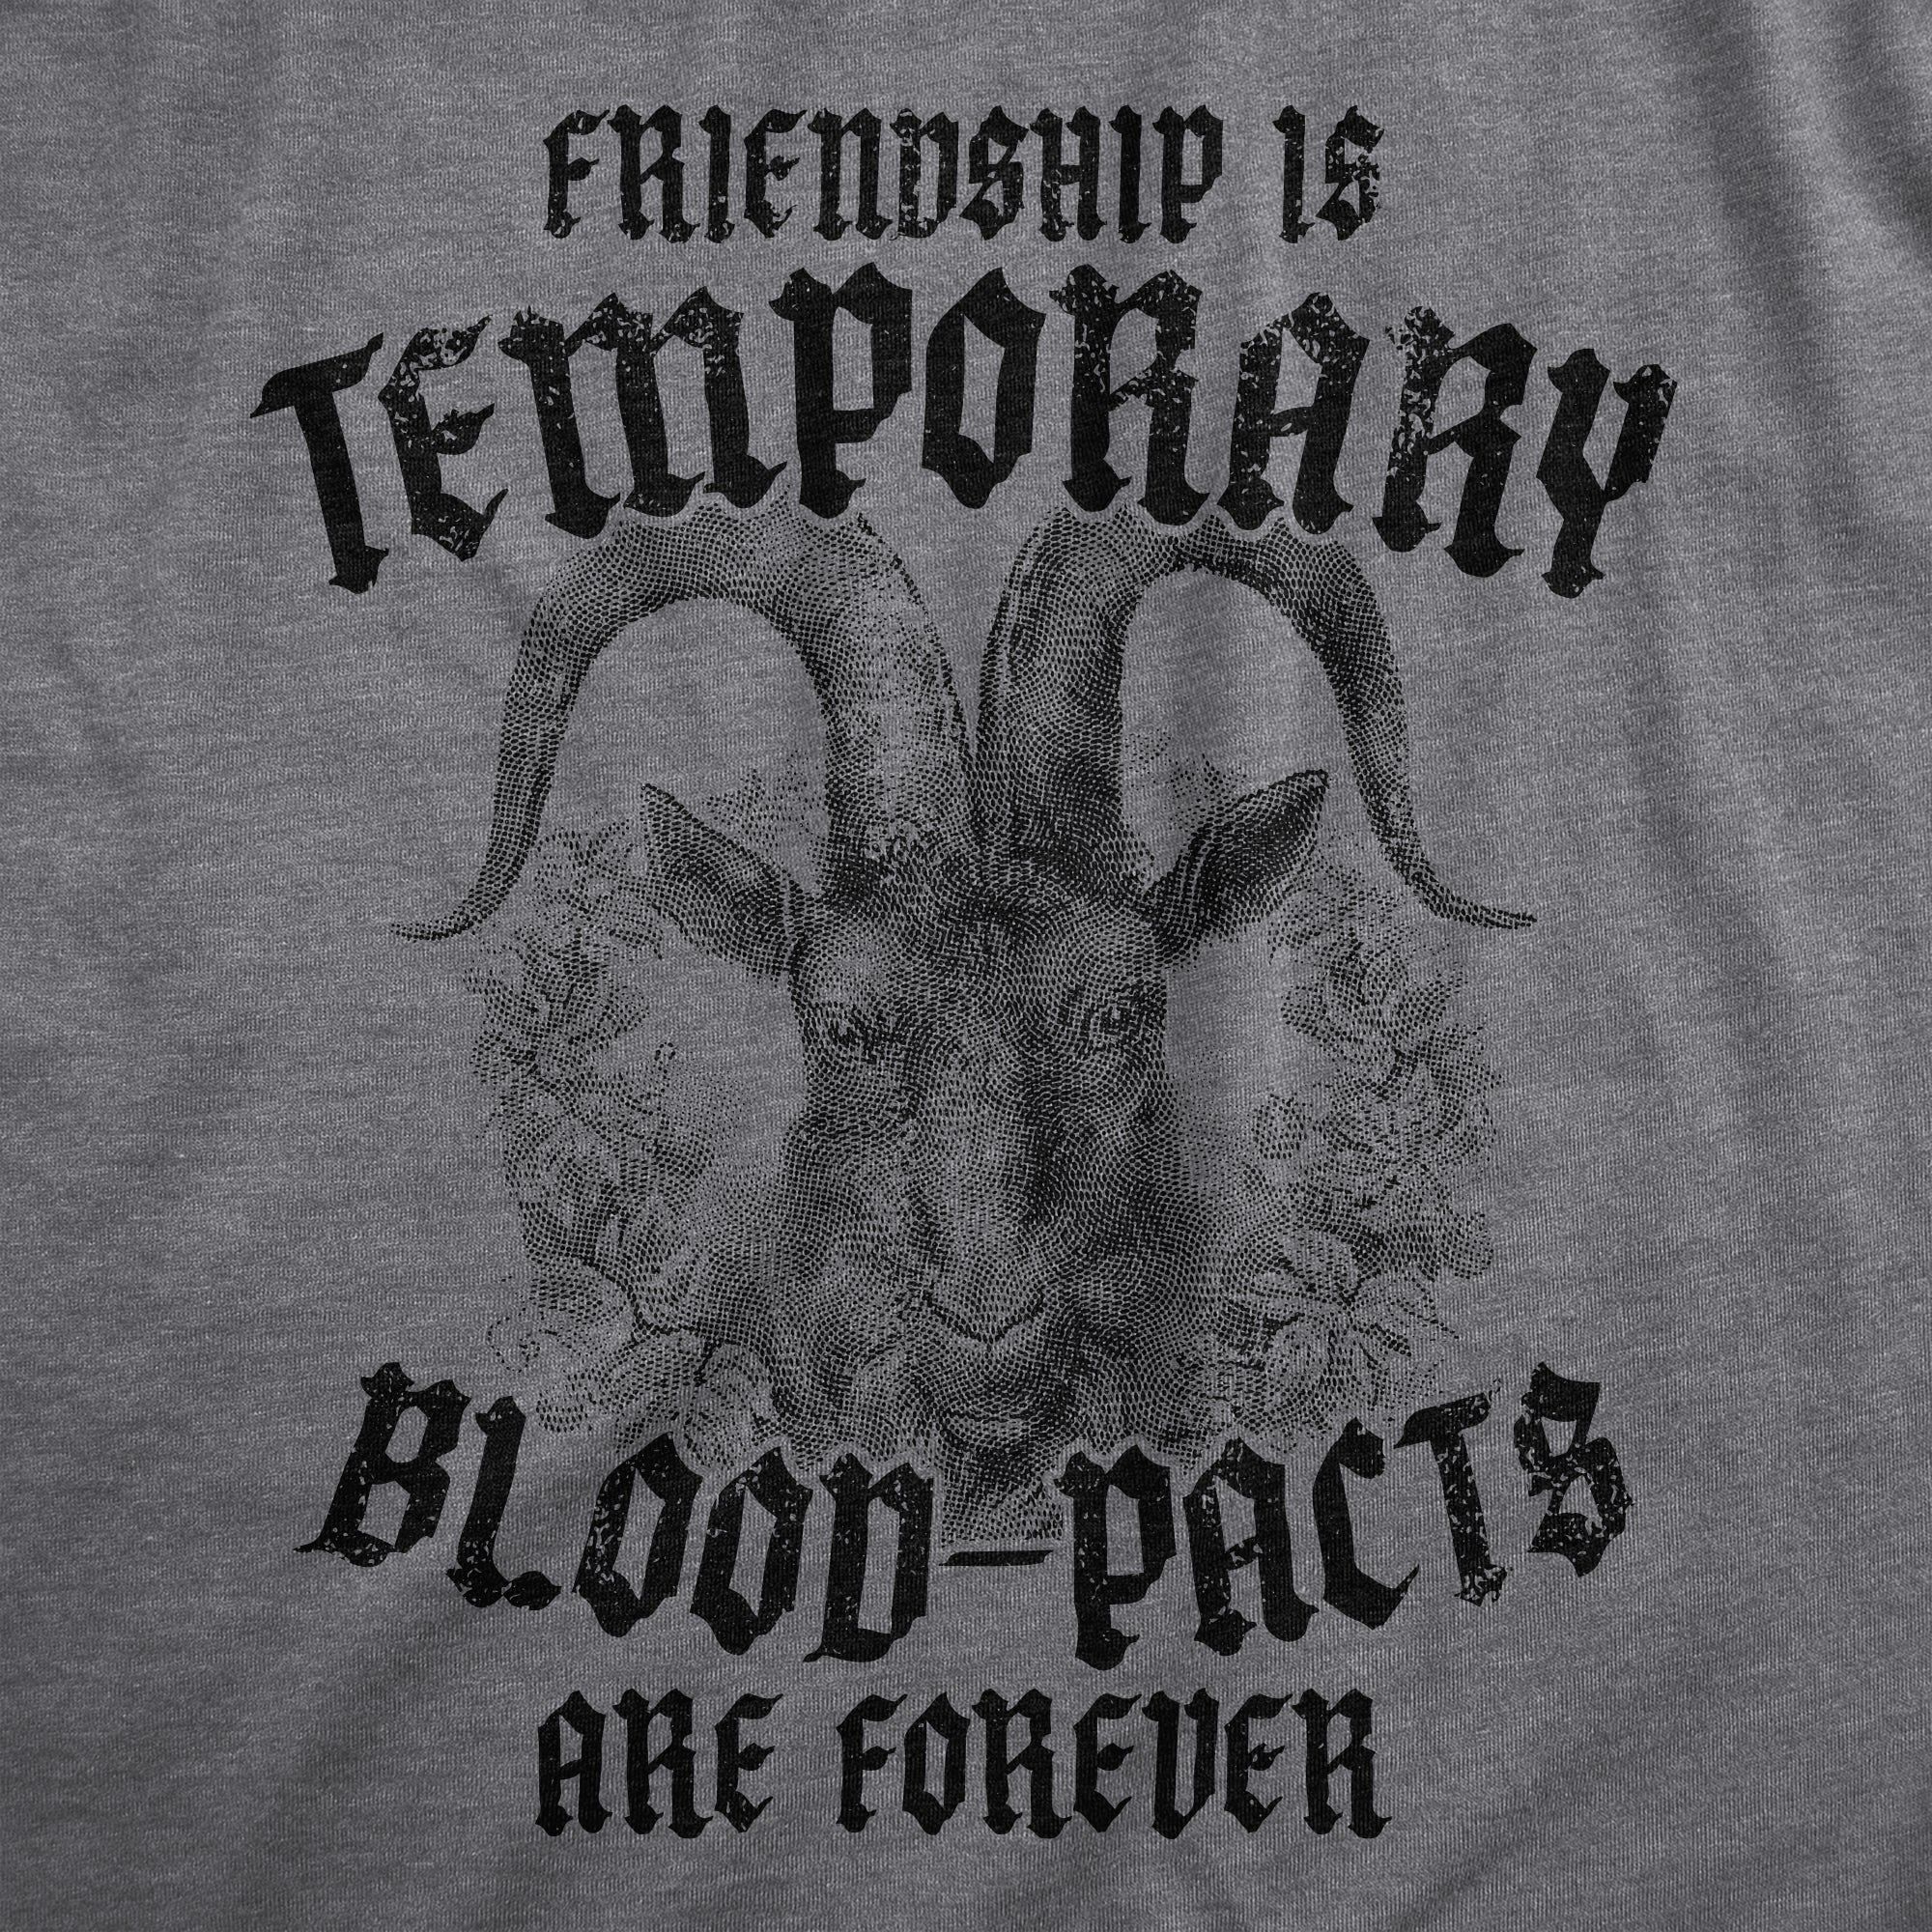 Funny Dark Heather Grey - BLOODPACTS Friendship Is Temporary Blood Pacts Are Forever Mens T Shirt Nerdy Sarcastic Tee